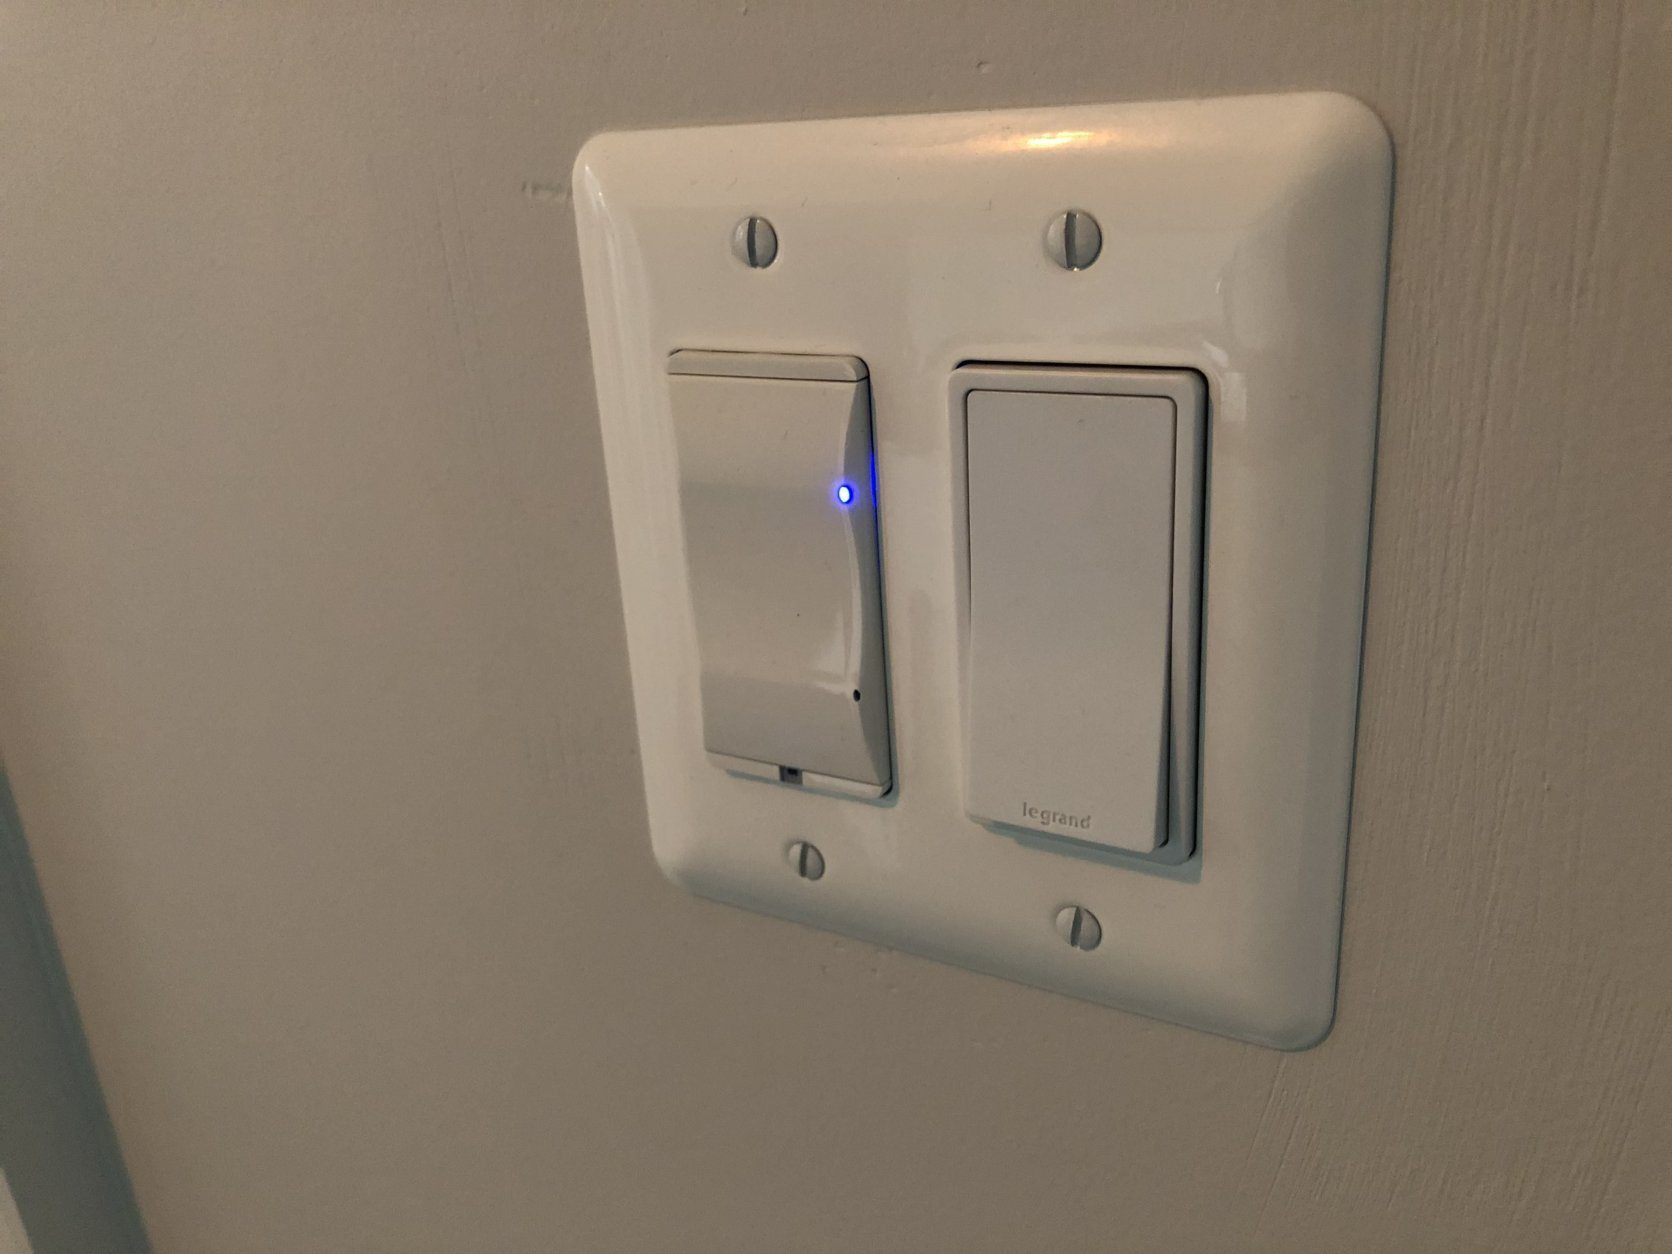 Motion detectors enable light switches to turn on and doors to close when Rob Jones enters a room in his new home. (WTOP/Neal Augenstein)